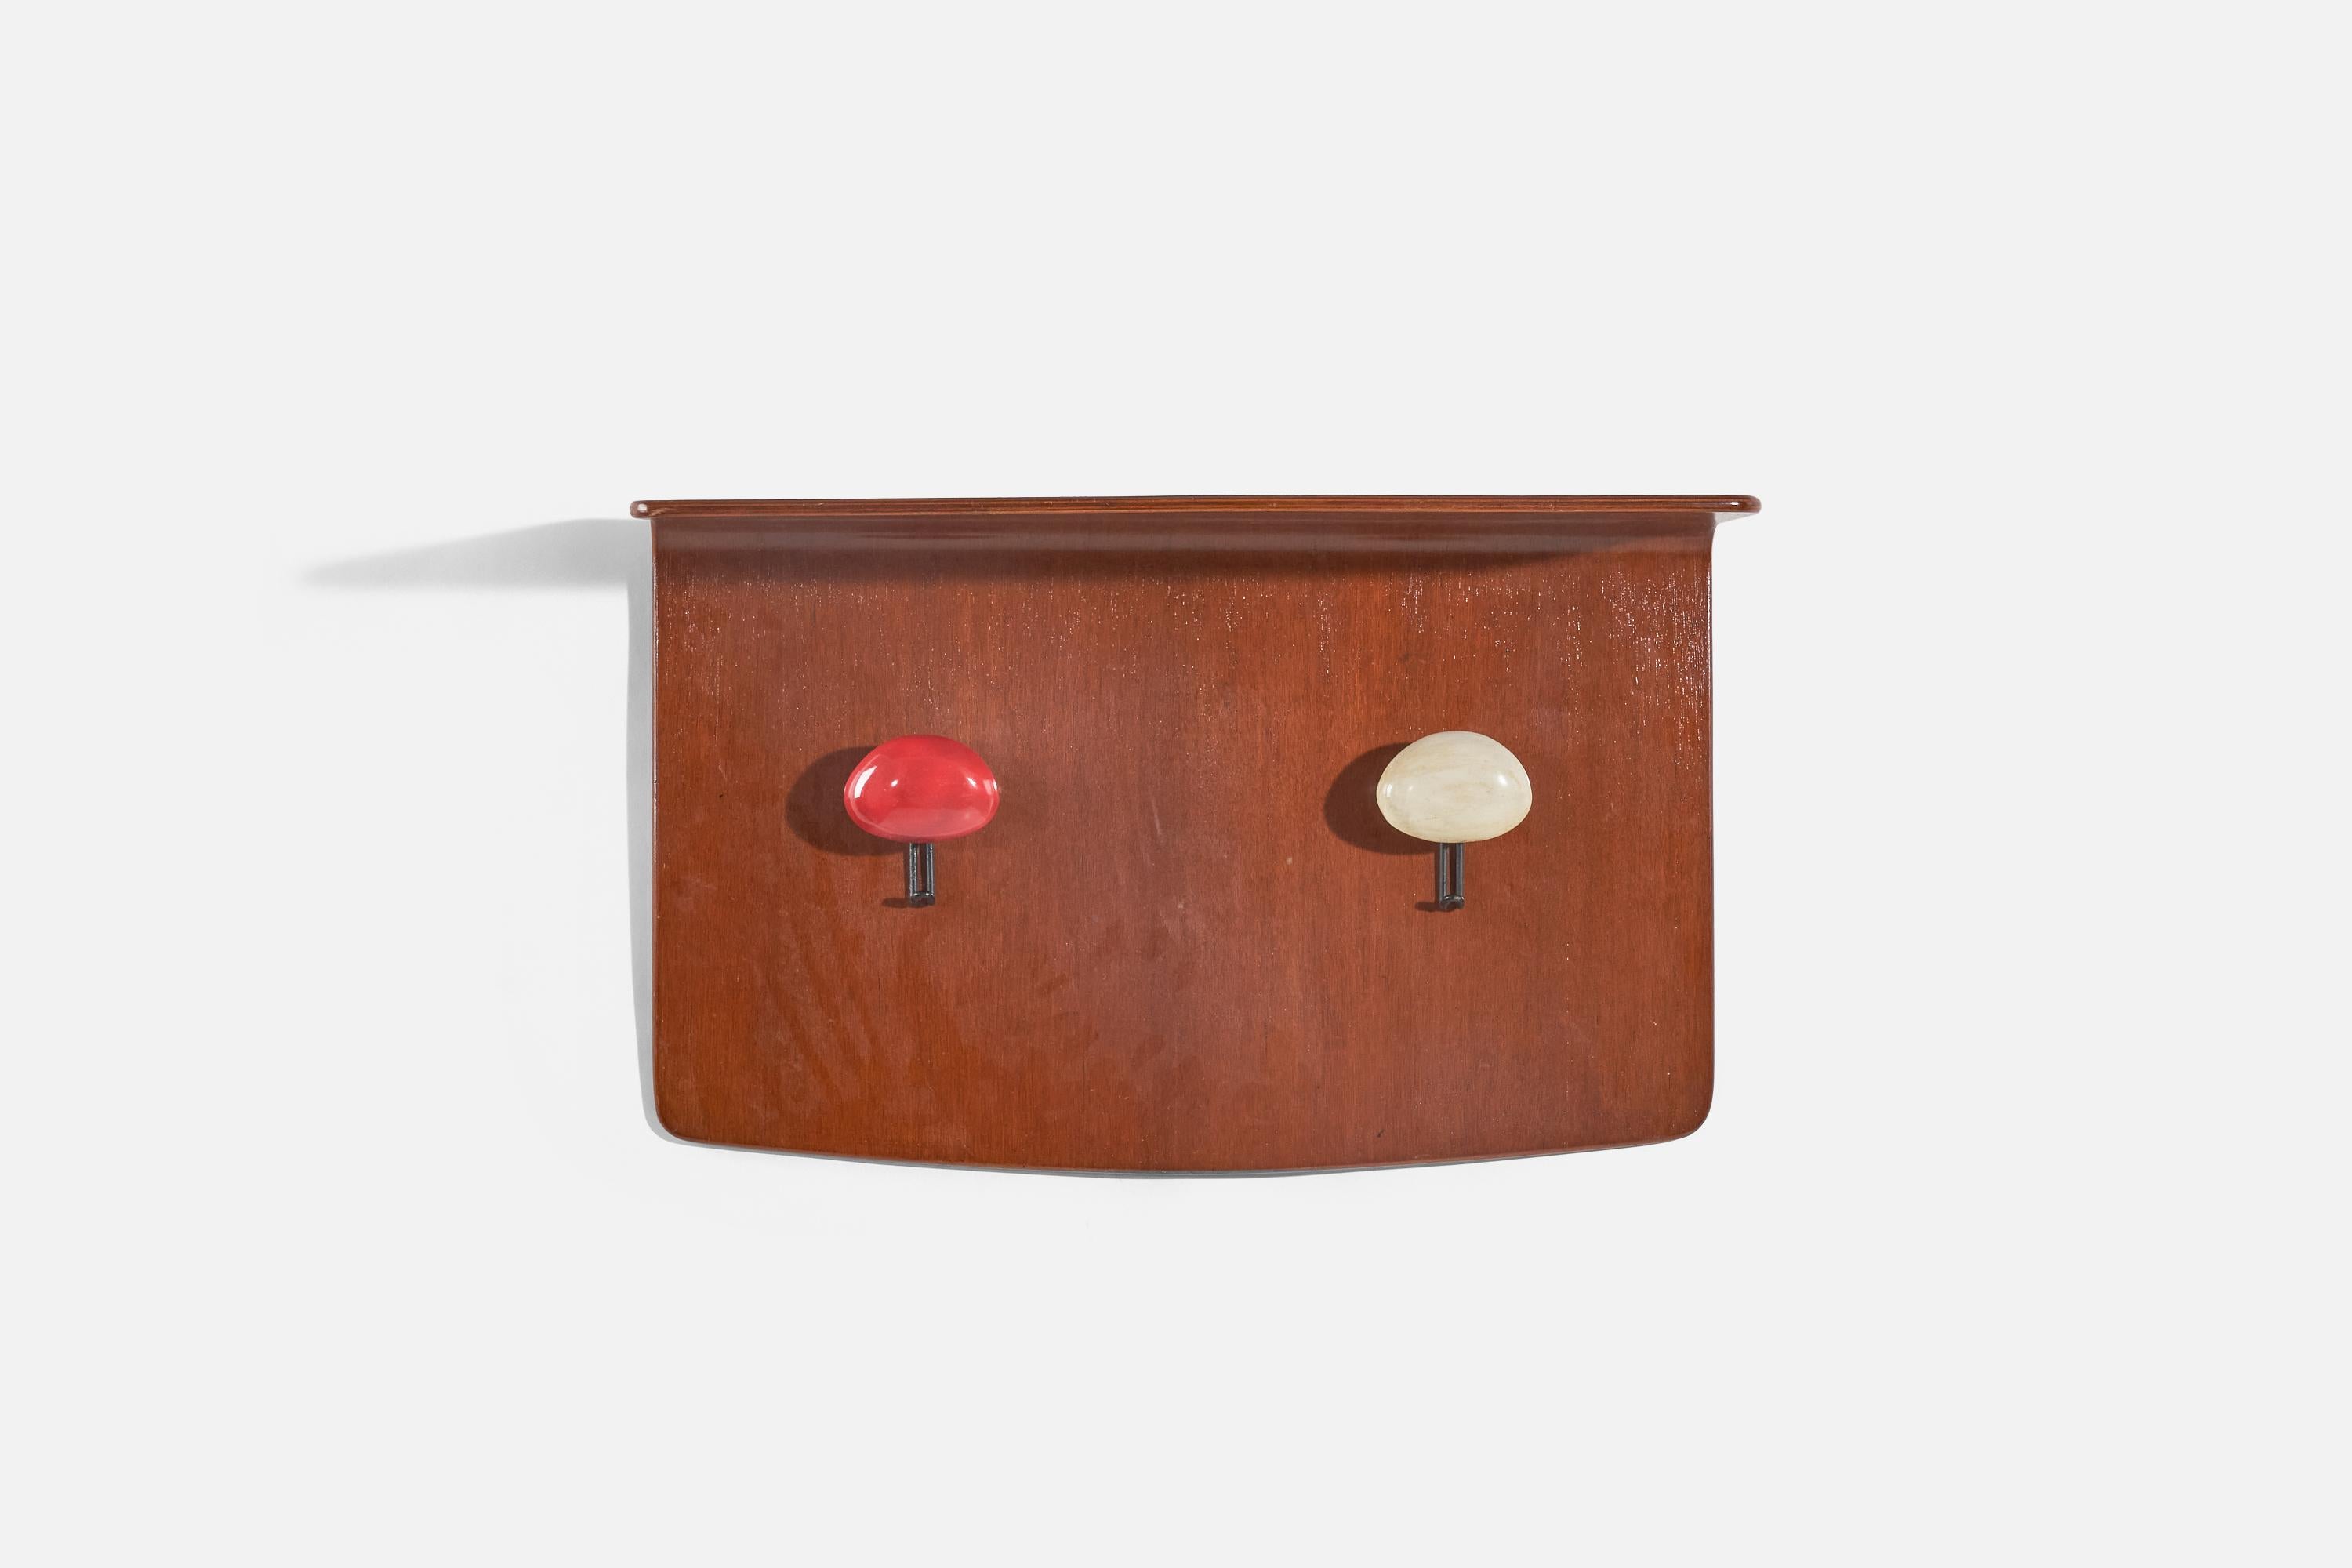 A coat rack with top shelf designed by Franco Campo and Carlo Graffi and produced by Home, Italy, 1950s. In plywood, black-lacquered metal, and red and white-painted solid wood.
  